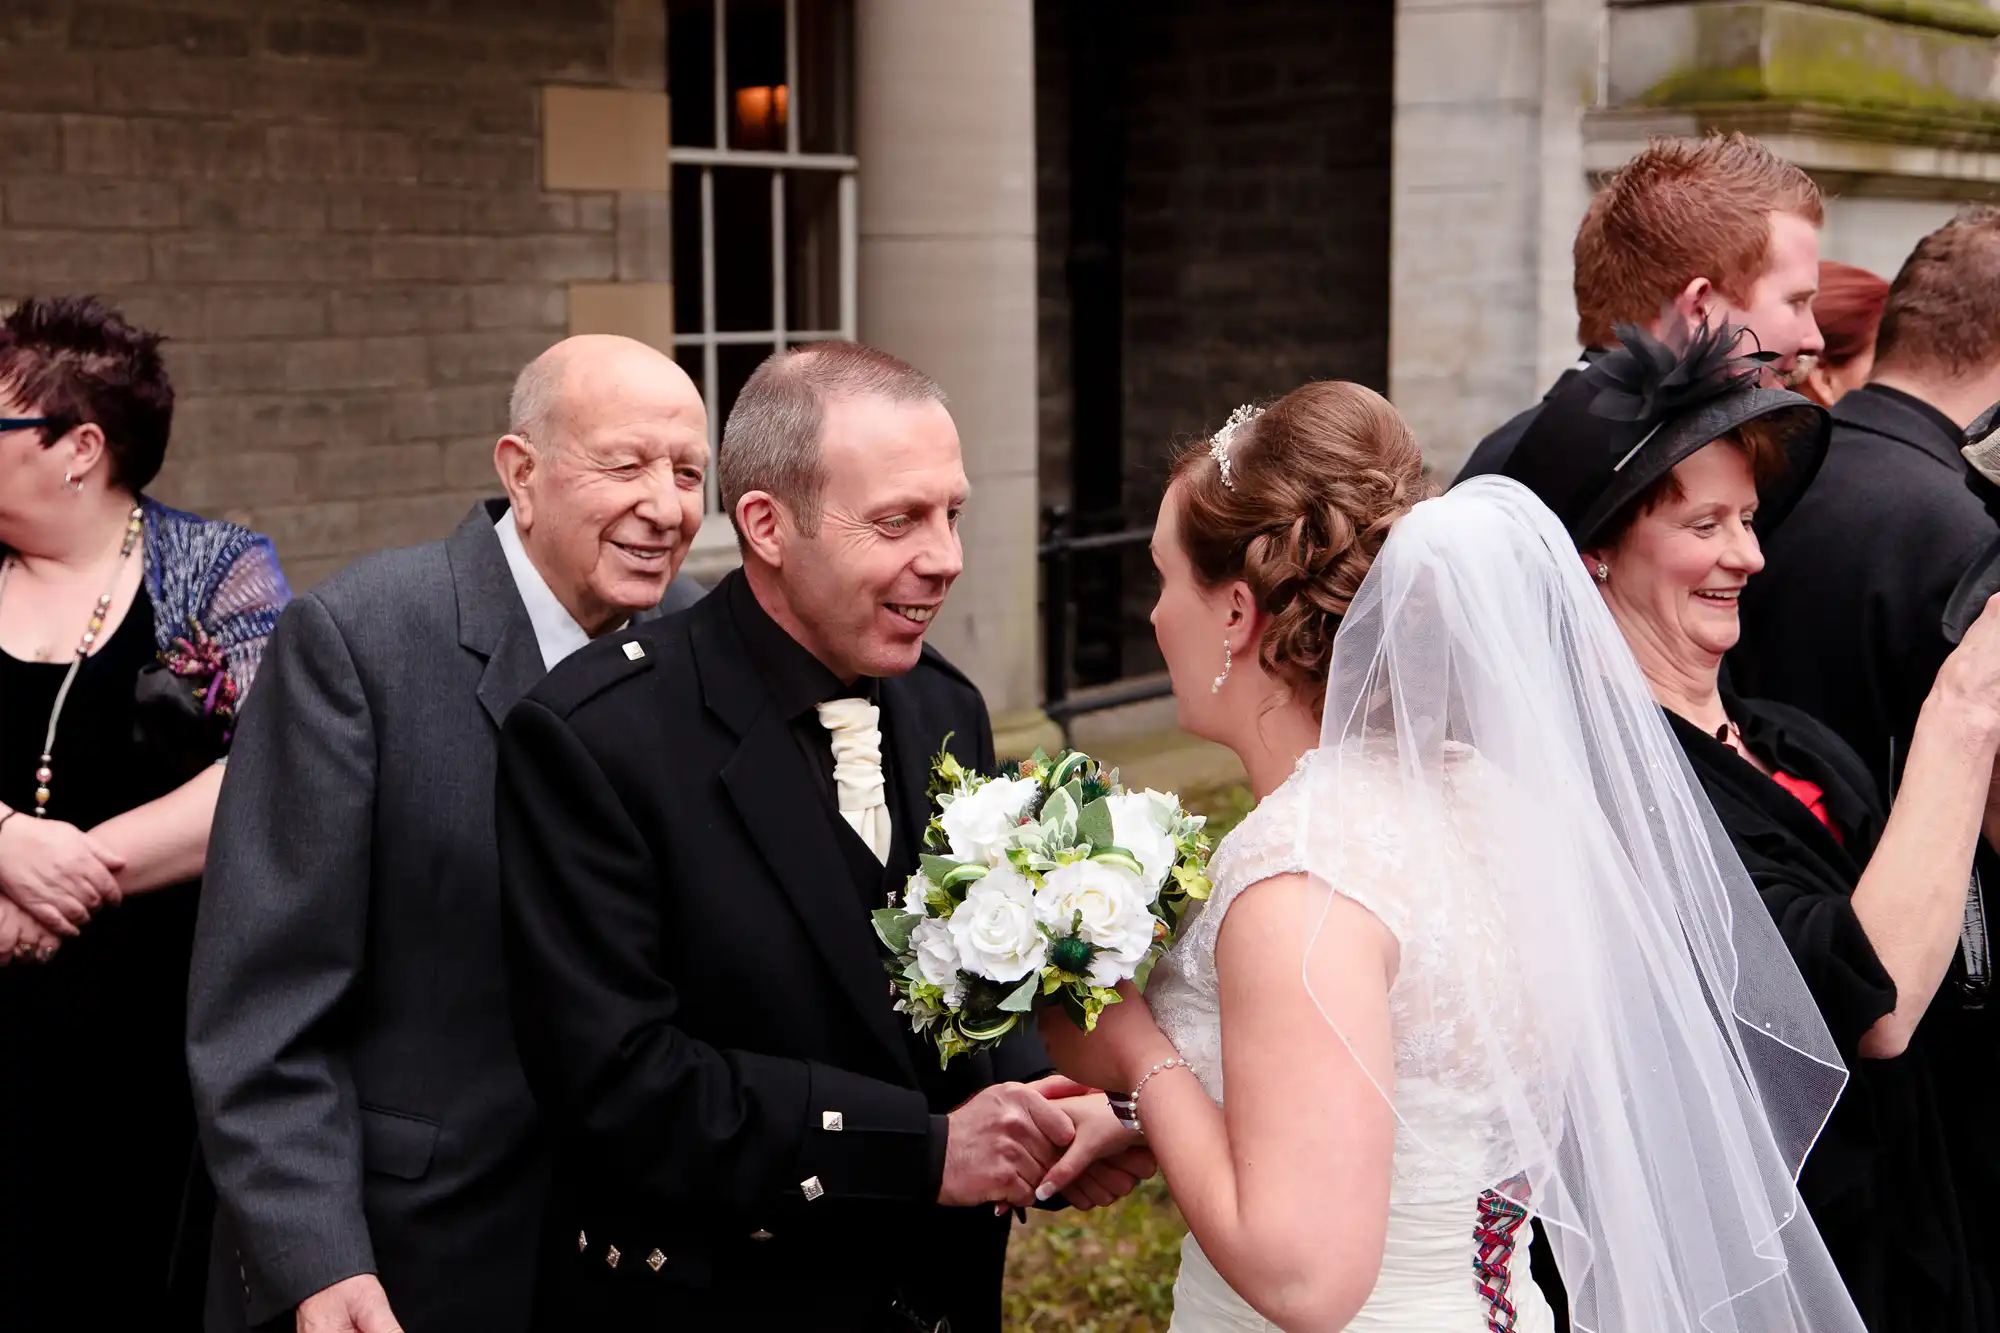 A bride and groom shake hands with an elderly man at a wedding, surrounded by smiling guests.